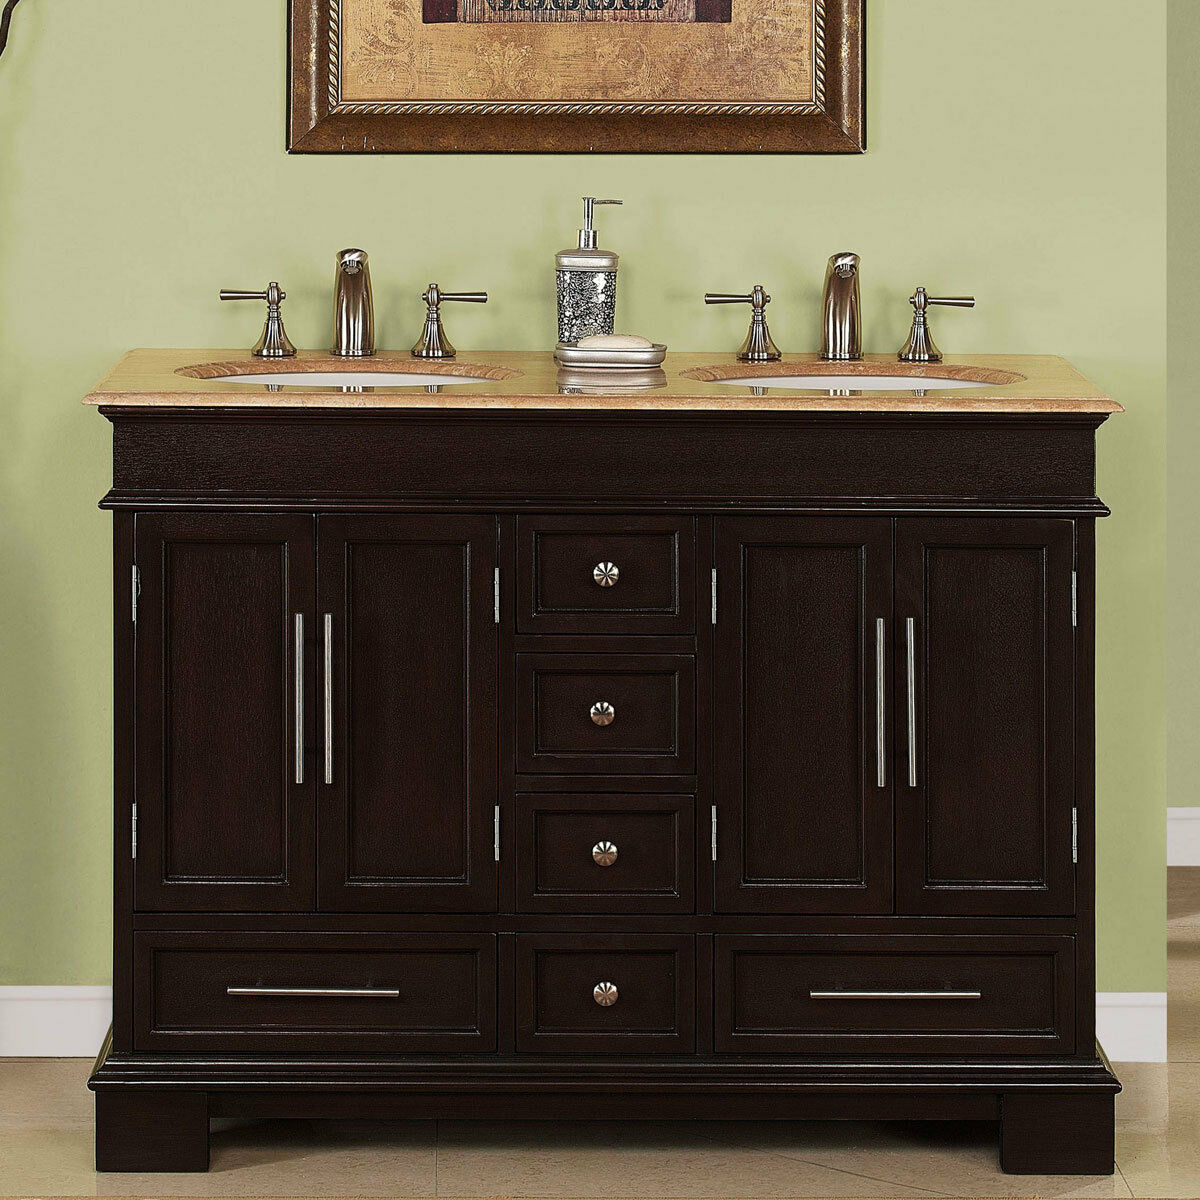 Small Double Bathroom Sink Visualhunt, Small Double Sink Vanity Size